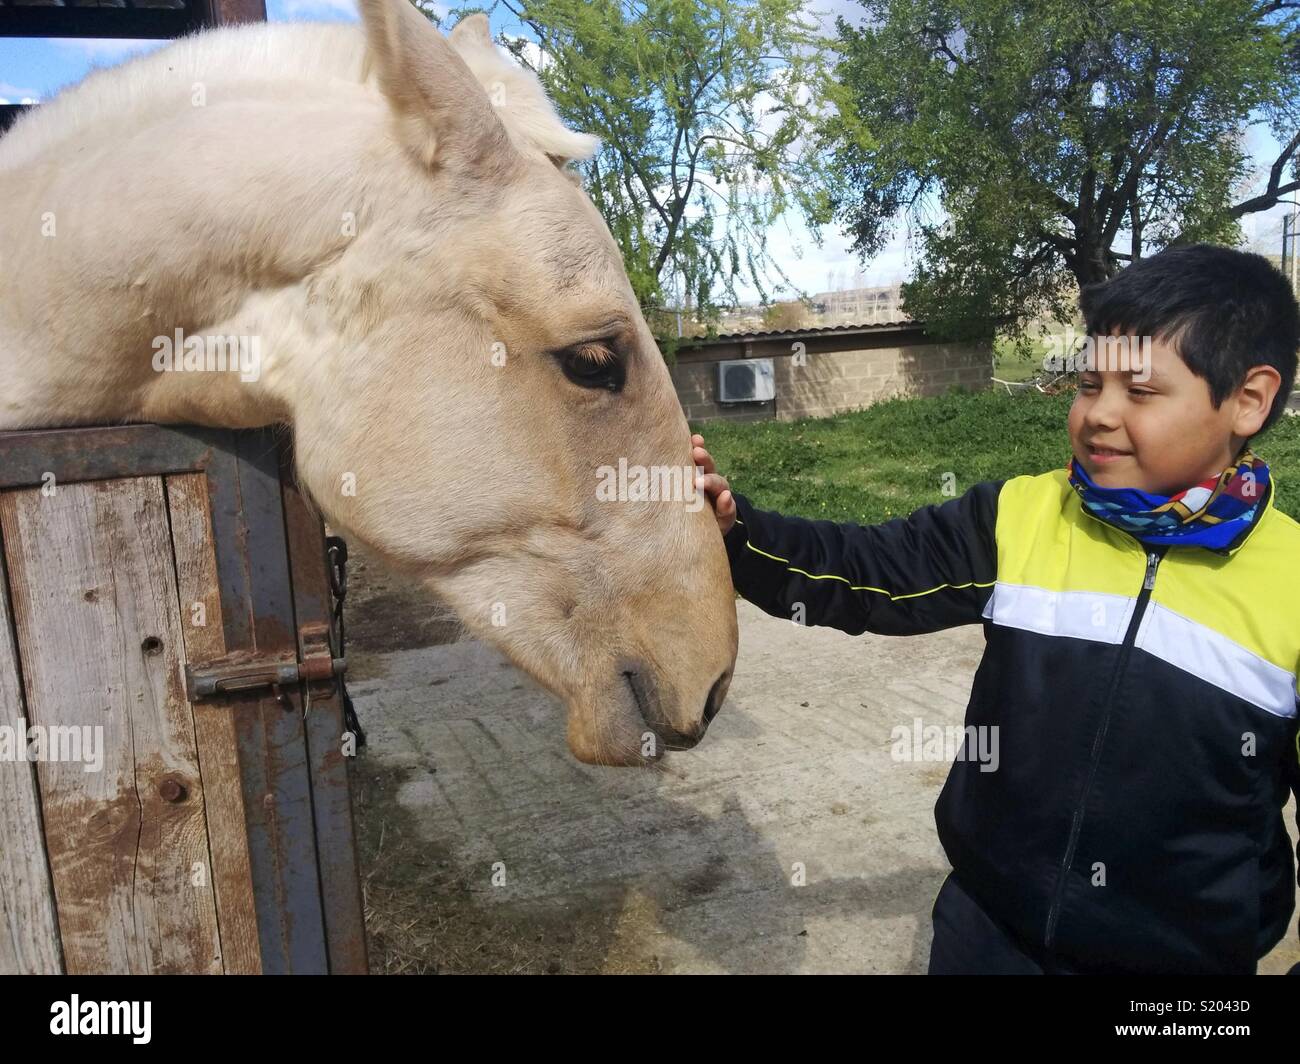 Boy with horse. Stock Photo